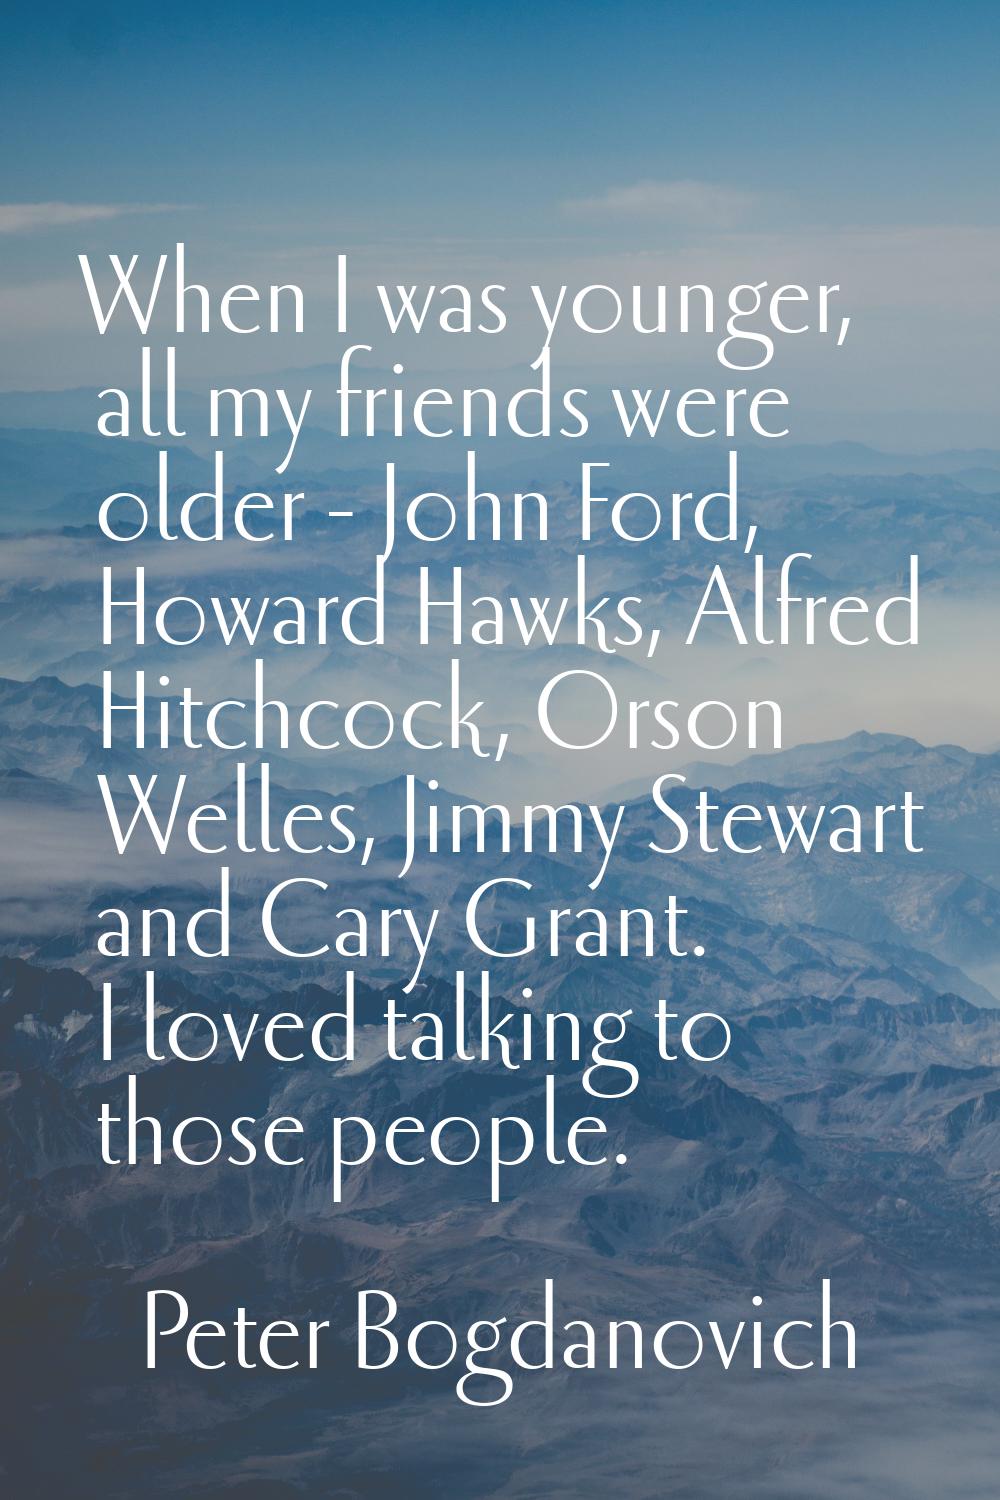 When I was younger, all my friends were older - John Ford, Howard Hawks, Alfred Hitchcock, Orson We